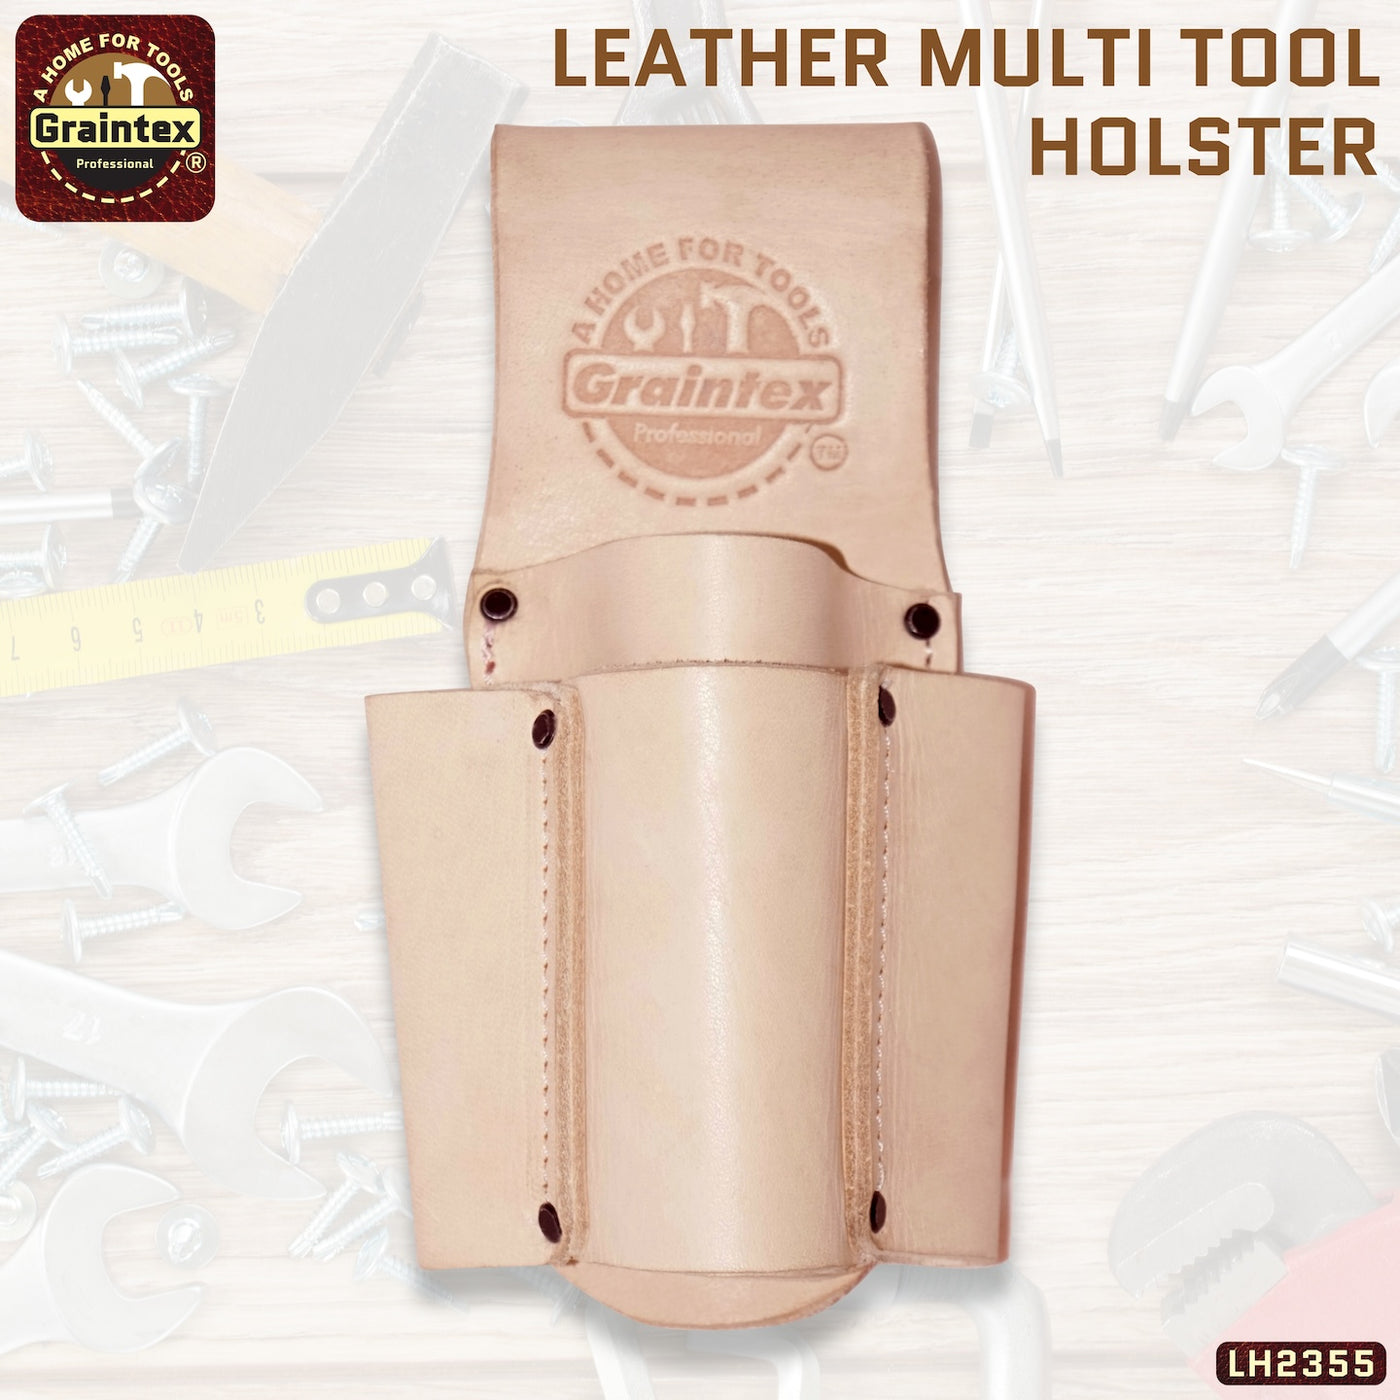 LH2355 :: LEATHER MULTI TOOL HOLSTER